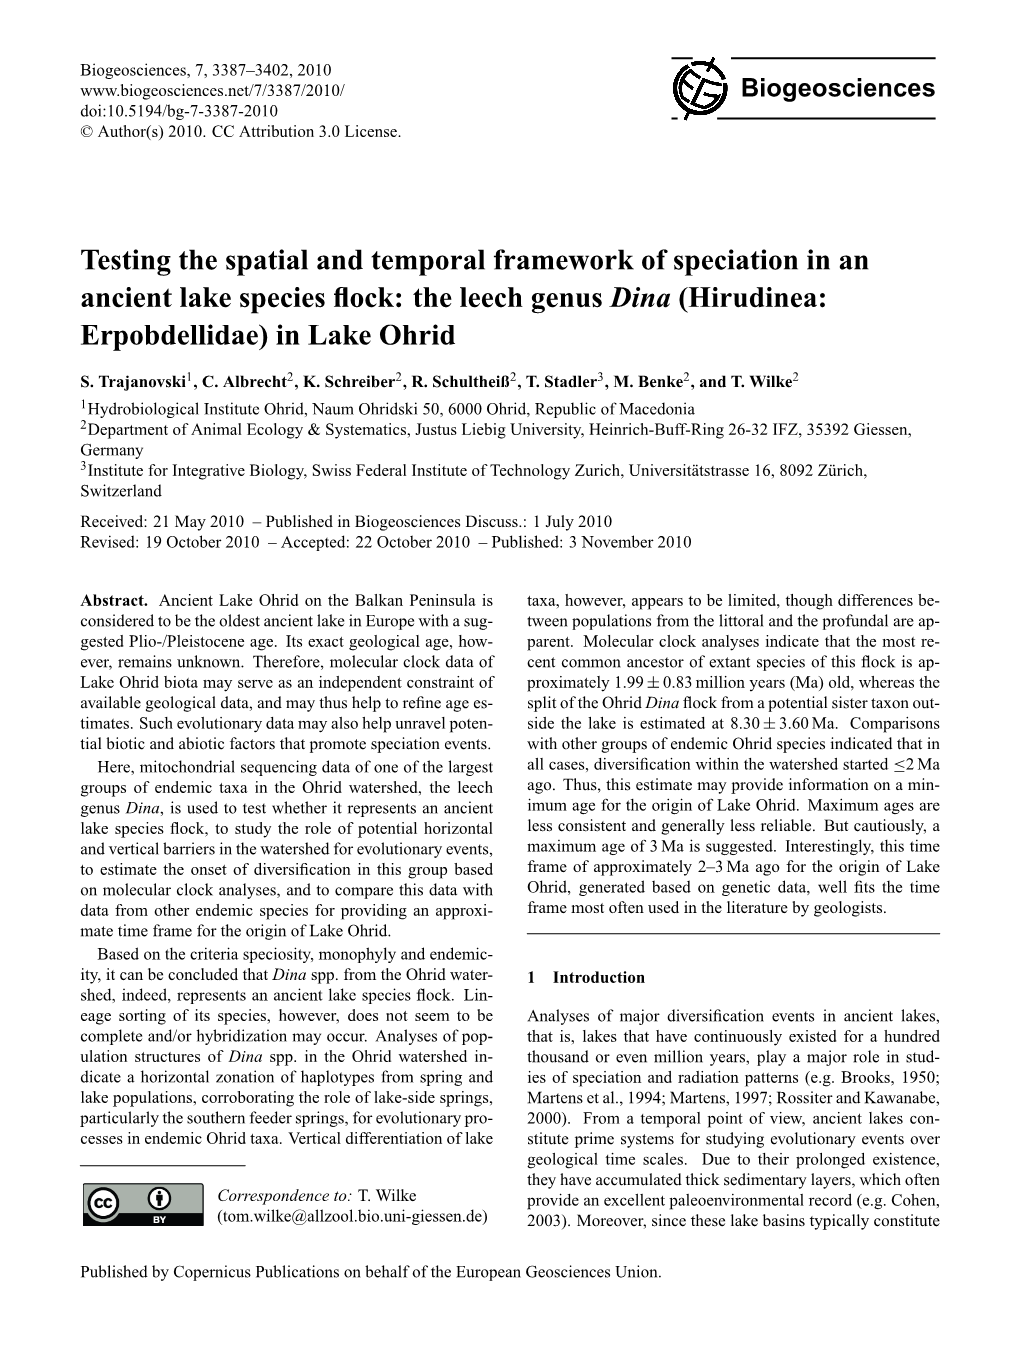 Testing the Spatial and Temporal Framework of Speciation in an Ancient Lake Species ﬂock: the Leech Genus Dina (Hirudinea: Erpobdellidae) in Lake Ohrid